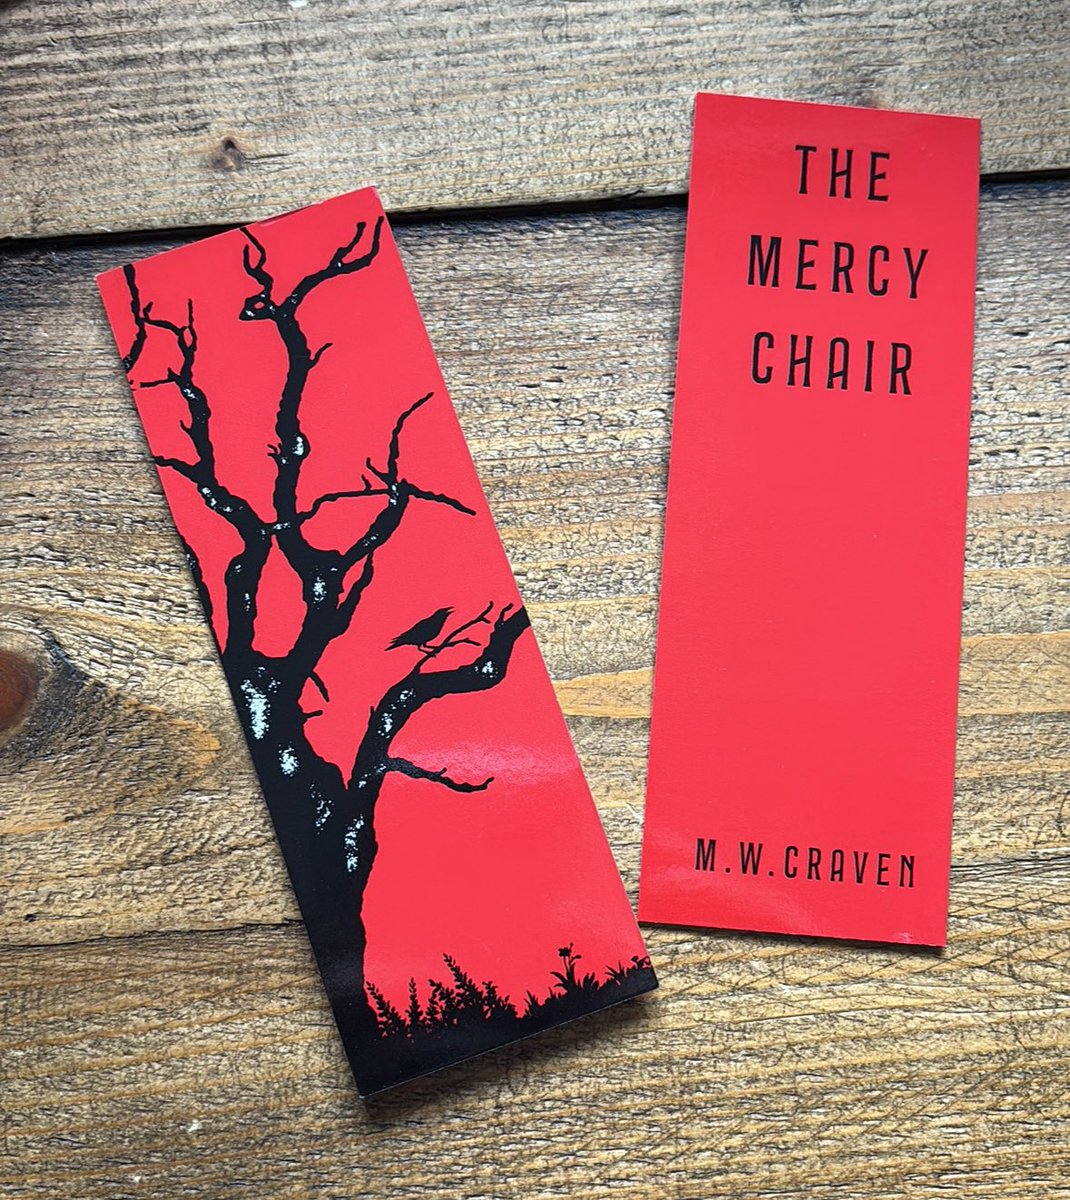 And just to sweeten the deal, and definitely not because I forgot to mention this earlier, every @GoldsboroBooks special edition of #themercychair comes with an exclusive bookmark 🔖